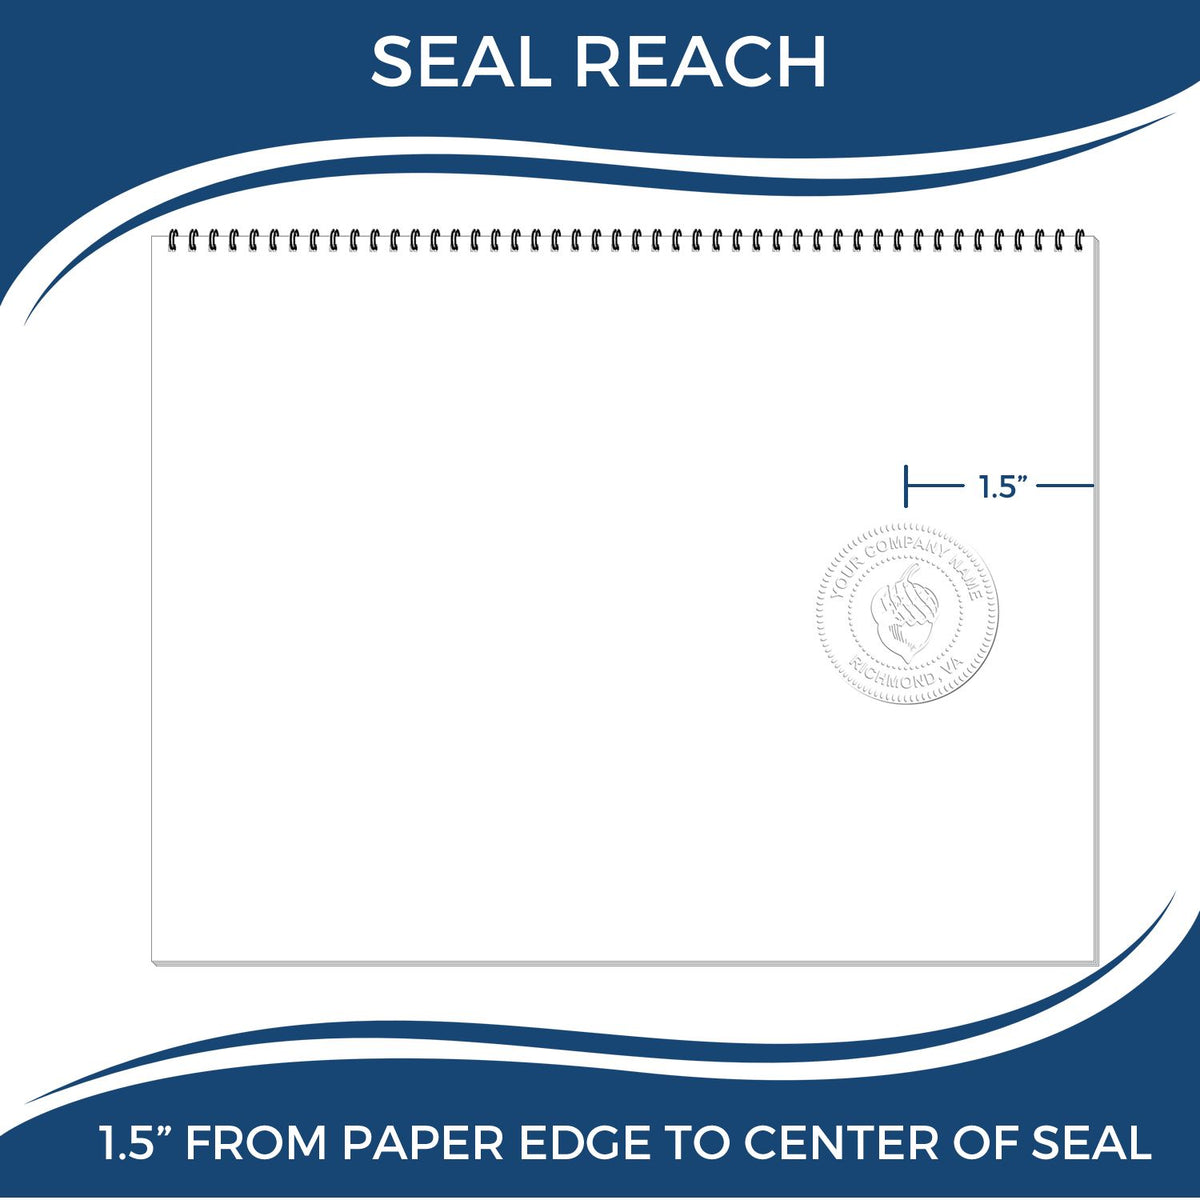 An infographic showing the seal reach which is represented by a ruler and a miniature seal image of the Hybrid Indiana Landscape Architect Seal